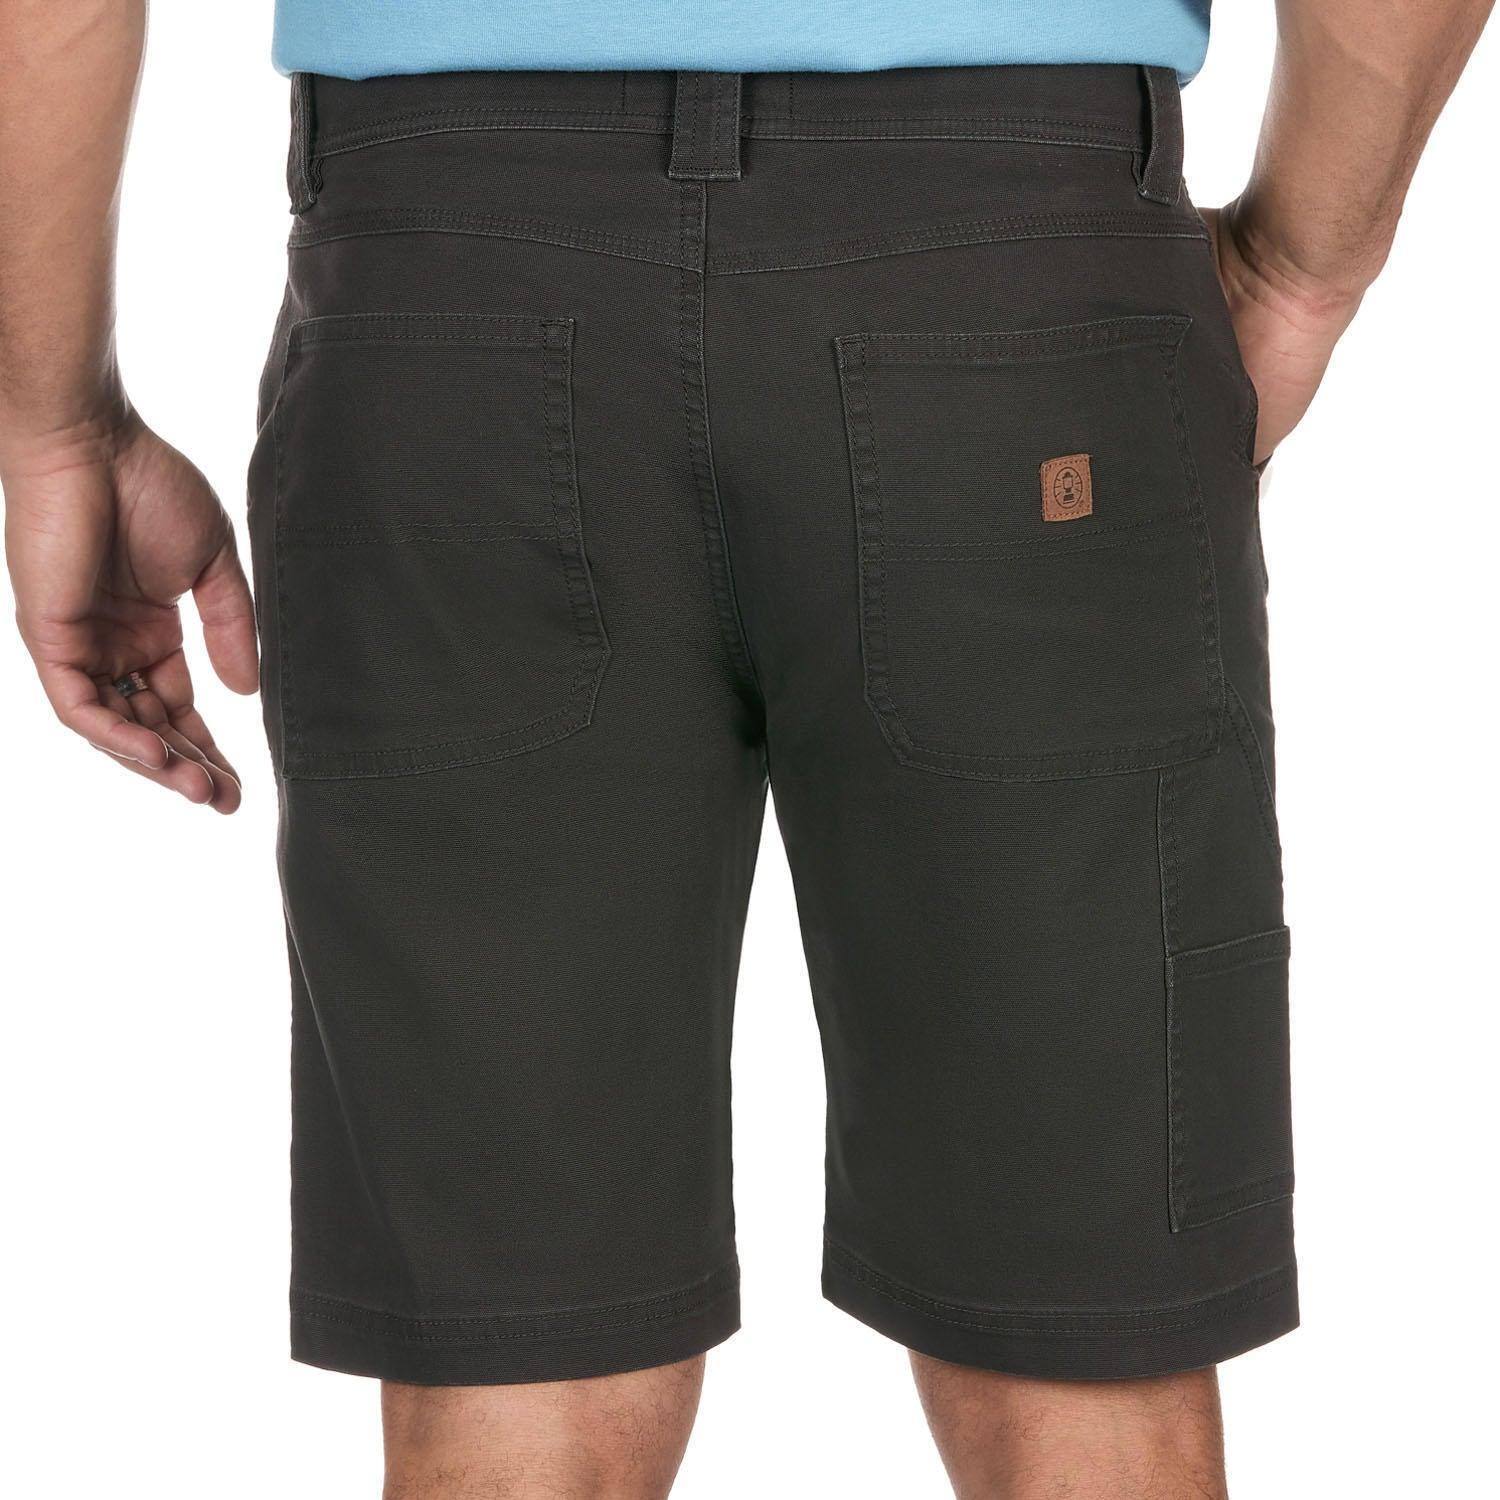 Coleman Men's Relaxed Fit Tear Resistant Stretch Utility Shorts - image 3 of 11